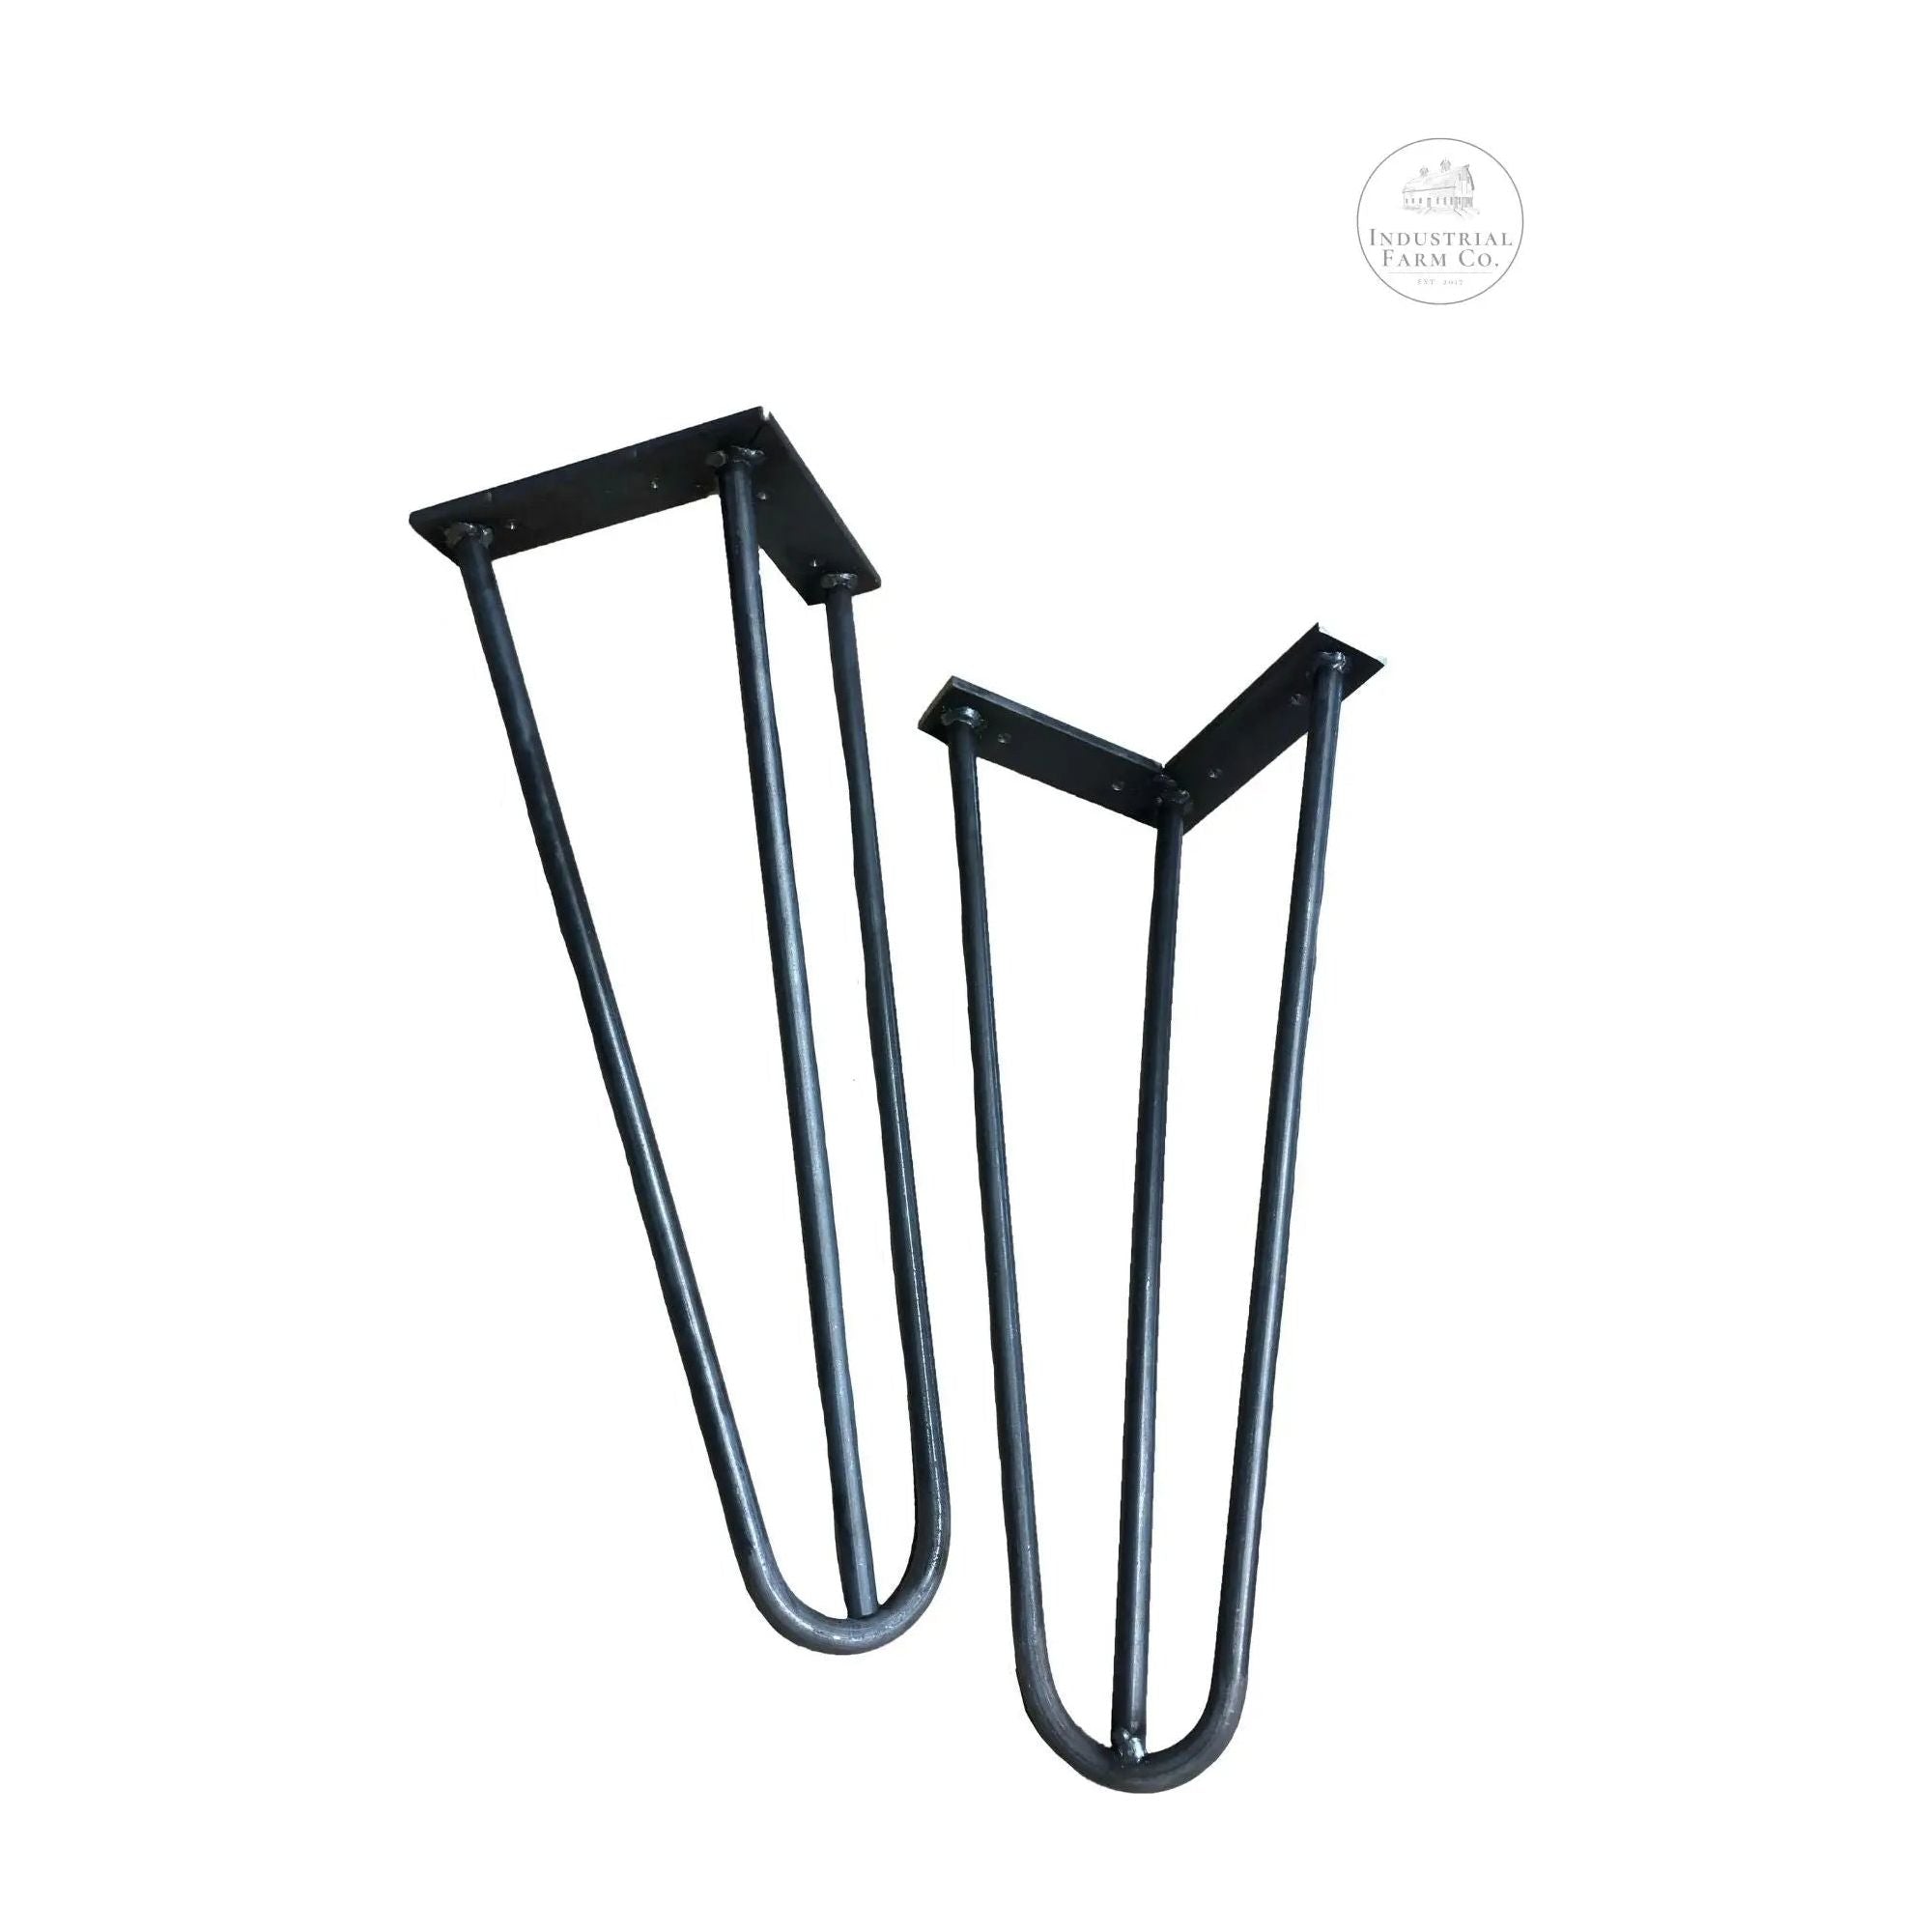 The North Street Steel Pin Legs  Raw - Uncoated Metal   | Industrial Farm Co